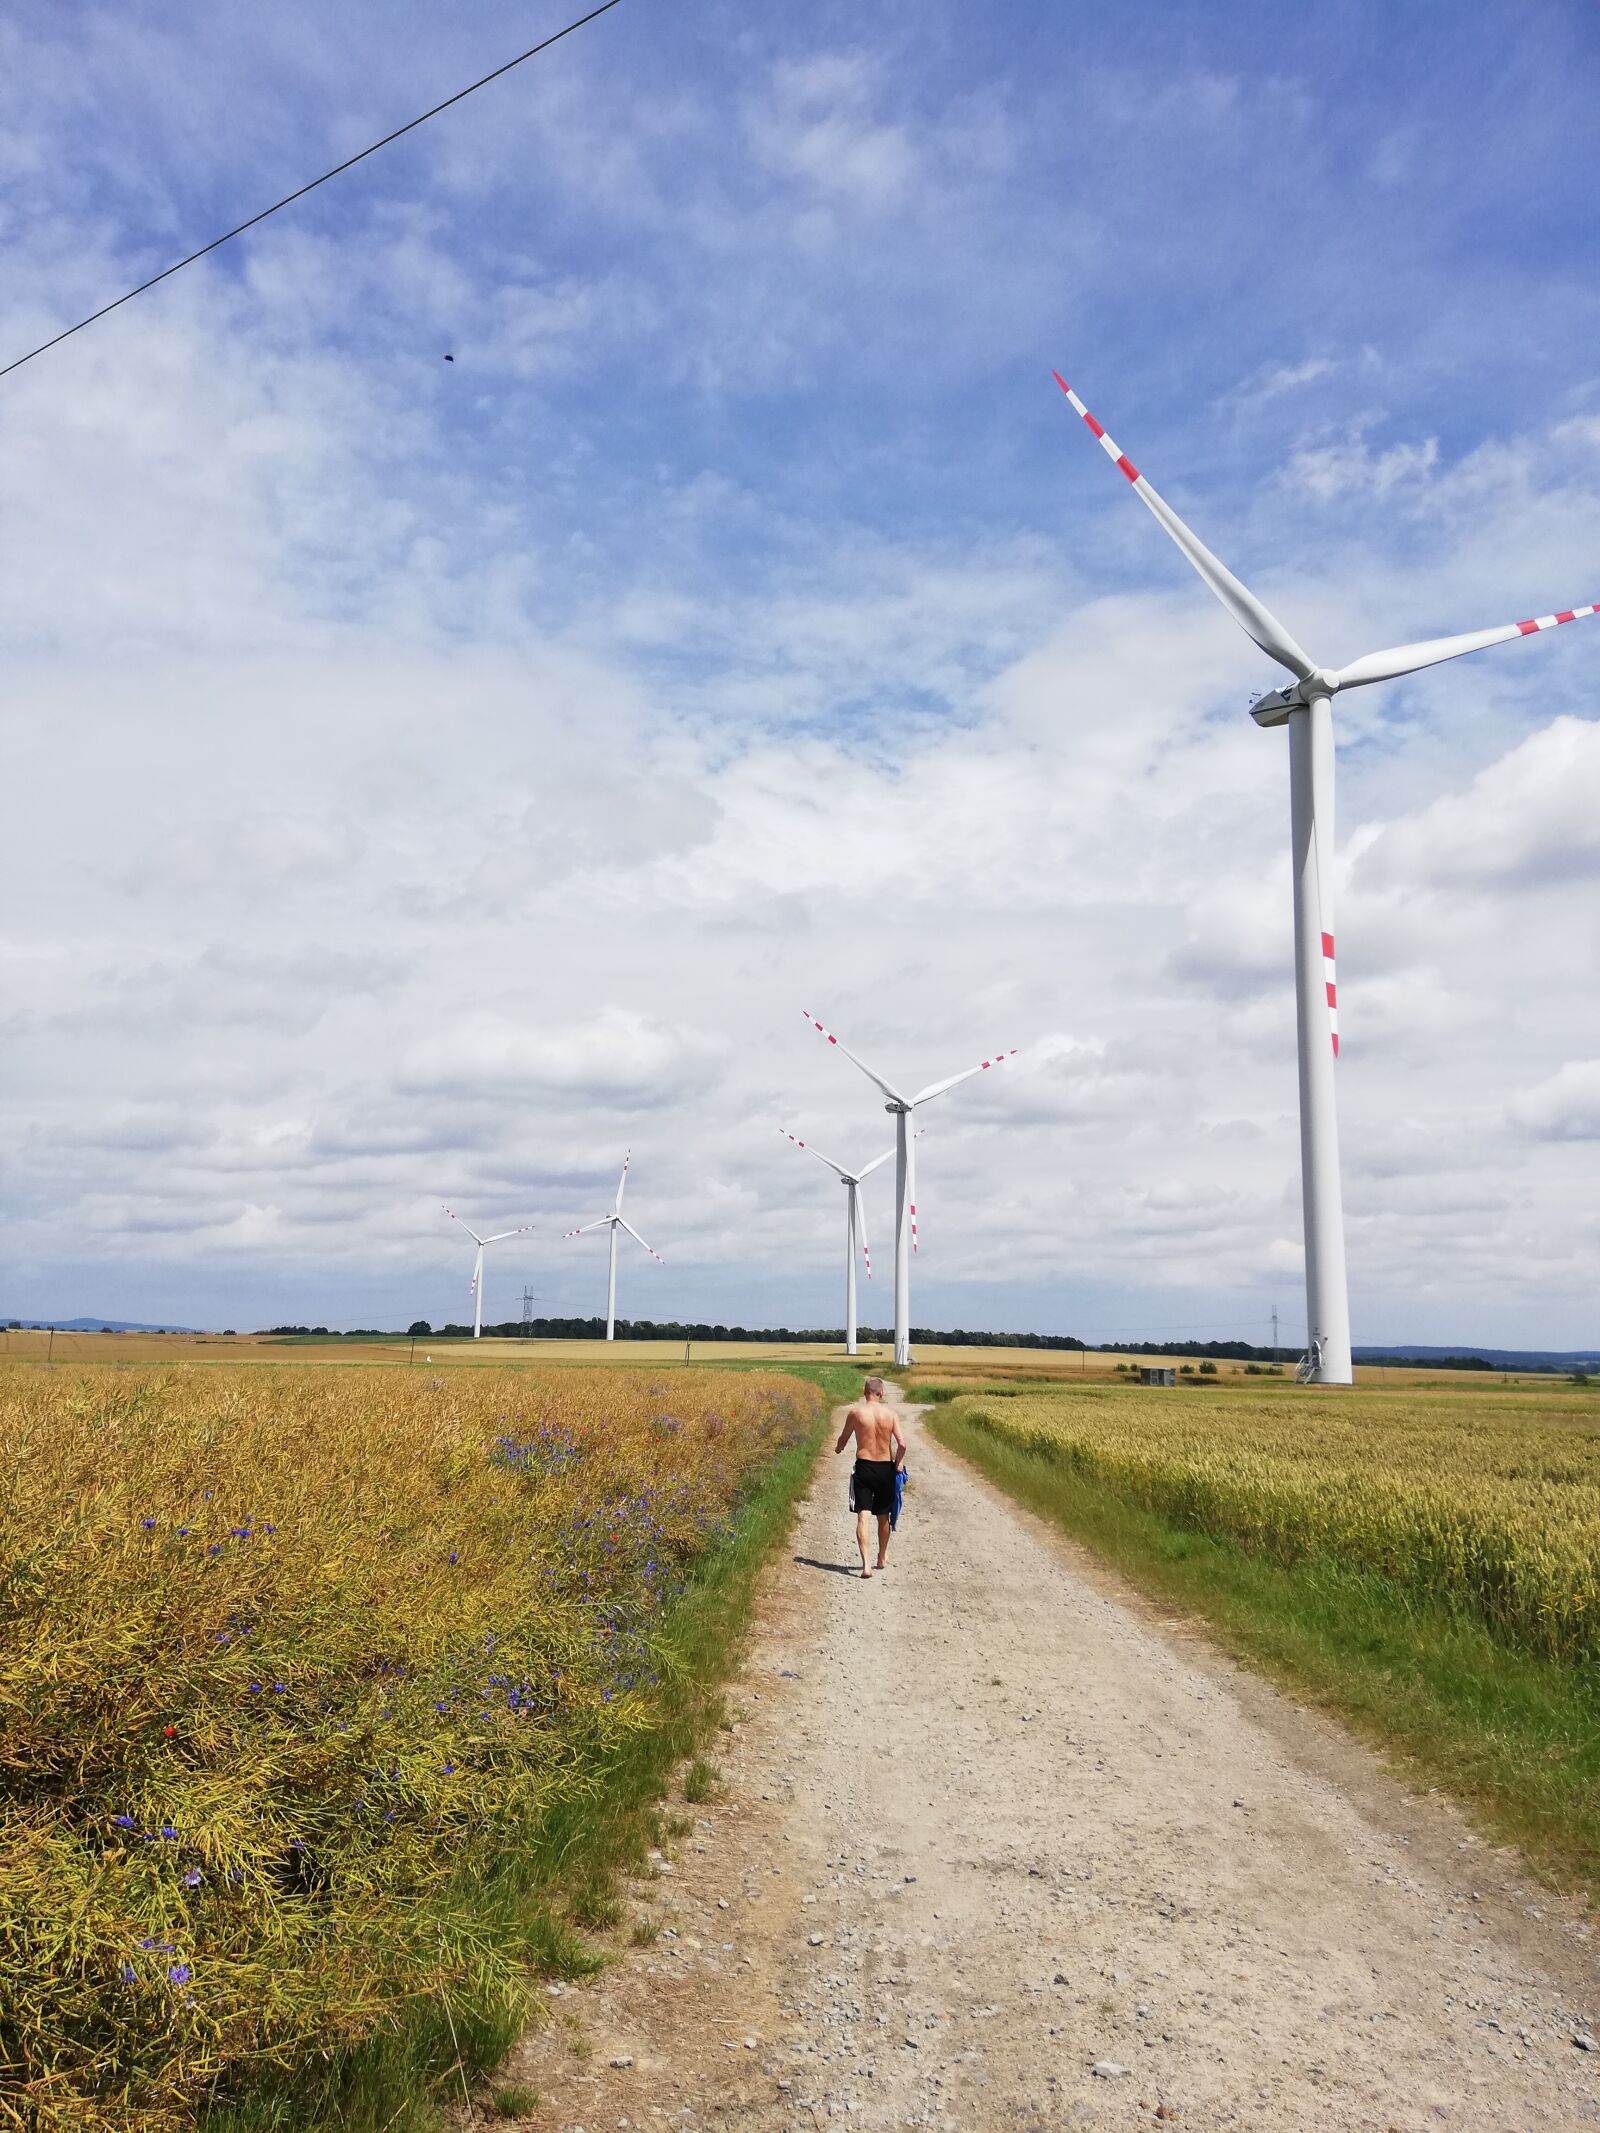 HUAWEI P20 lite sample photo. The windmills, landscape nature photography